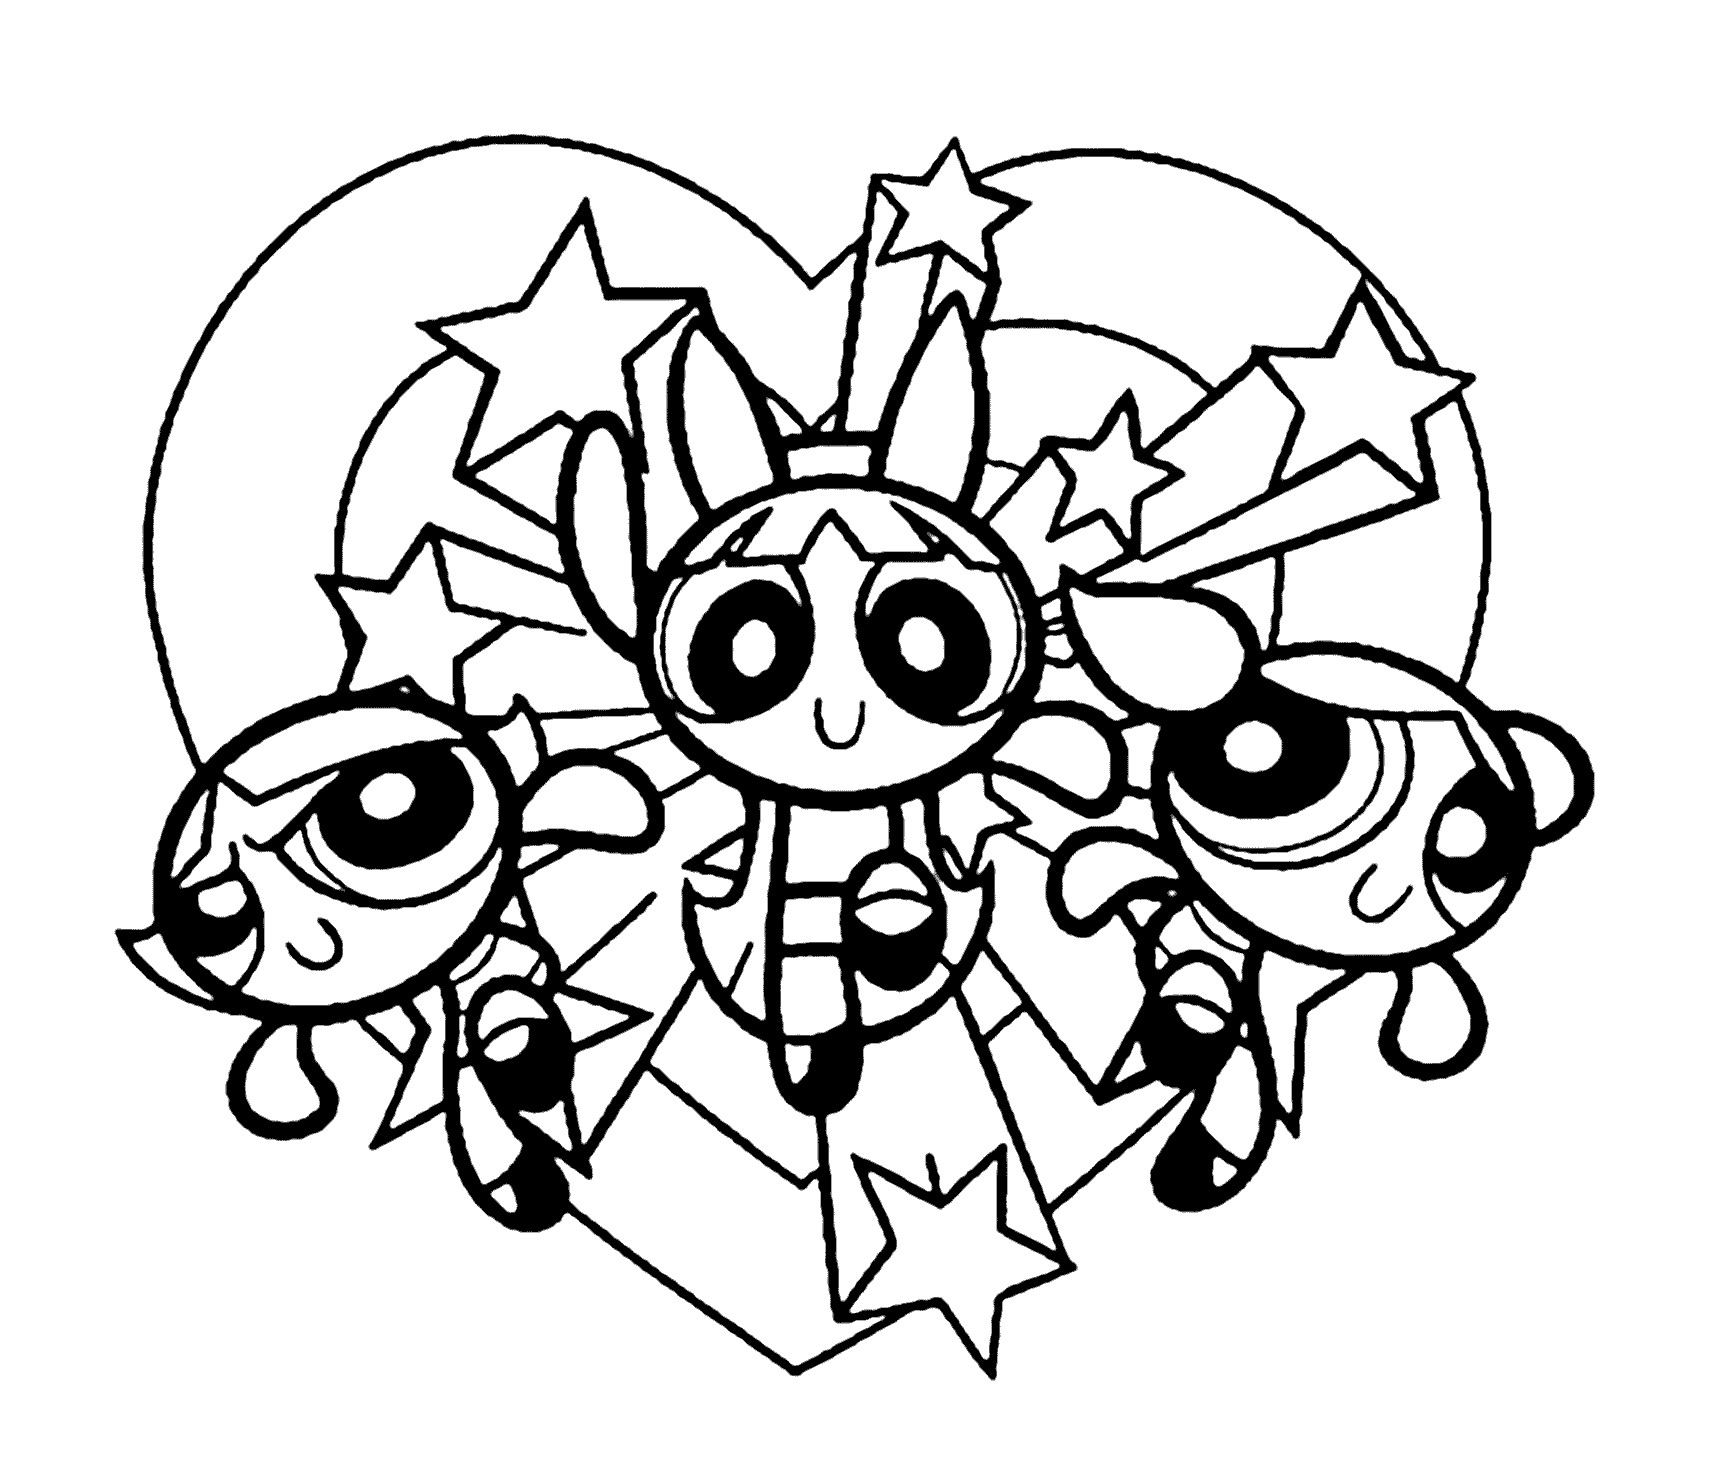 Powerpuff Girls Coloring Sheets
 12 printable pictures of powerpuff girls page Print